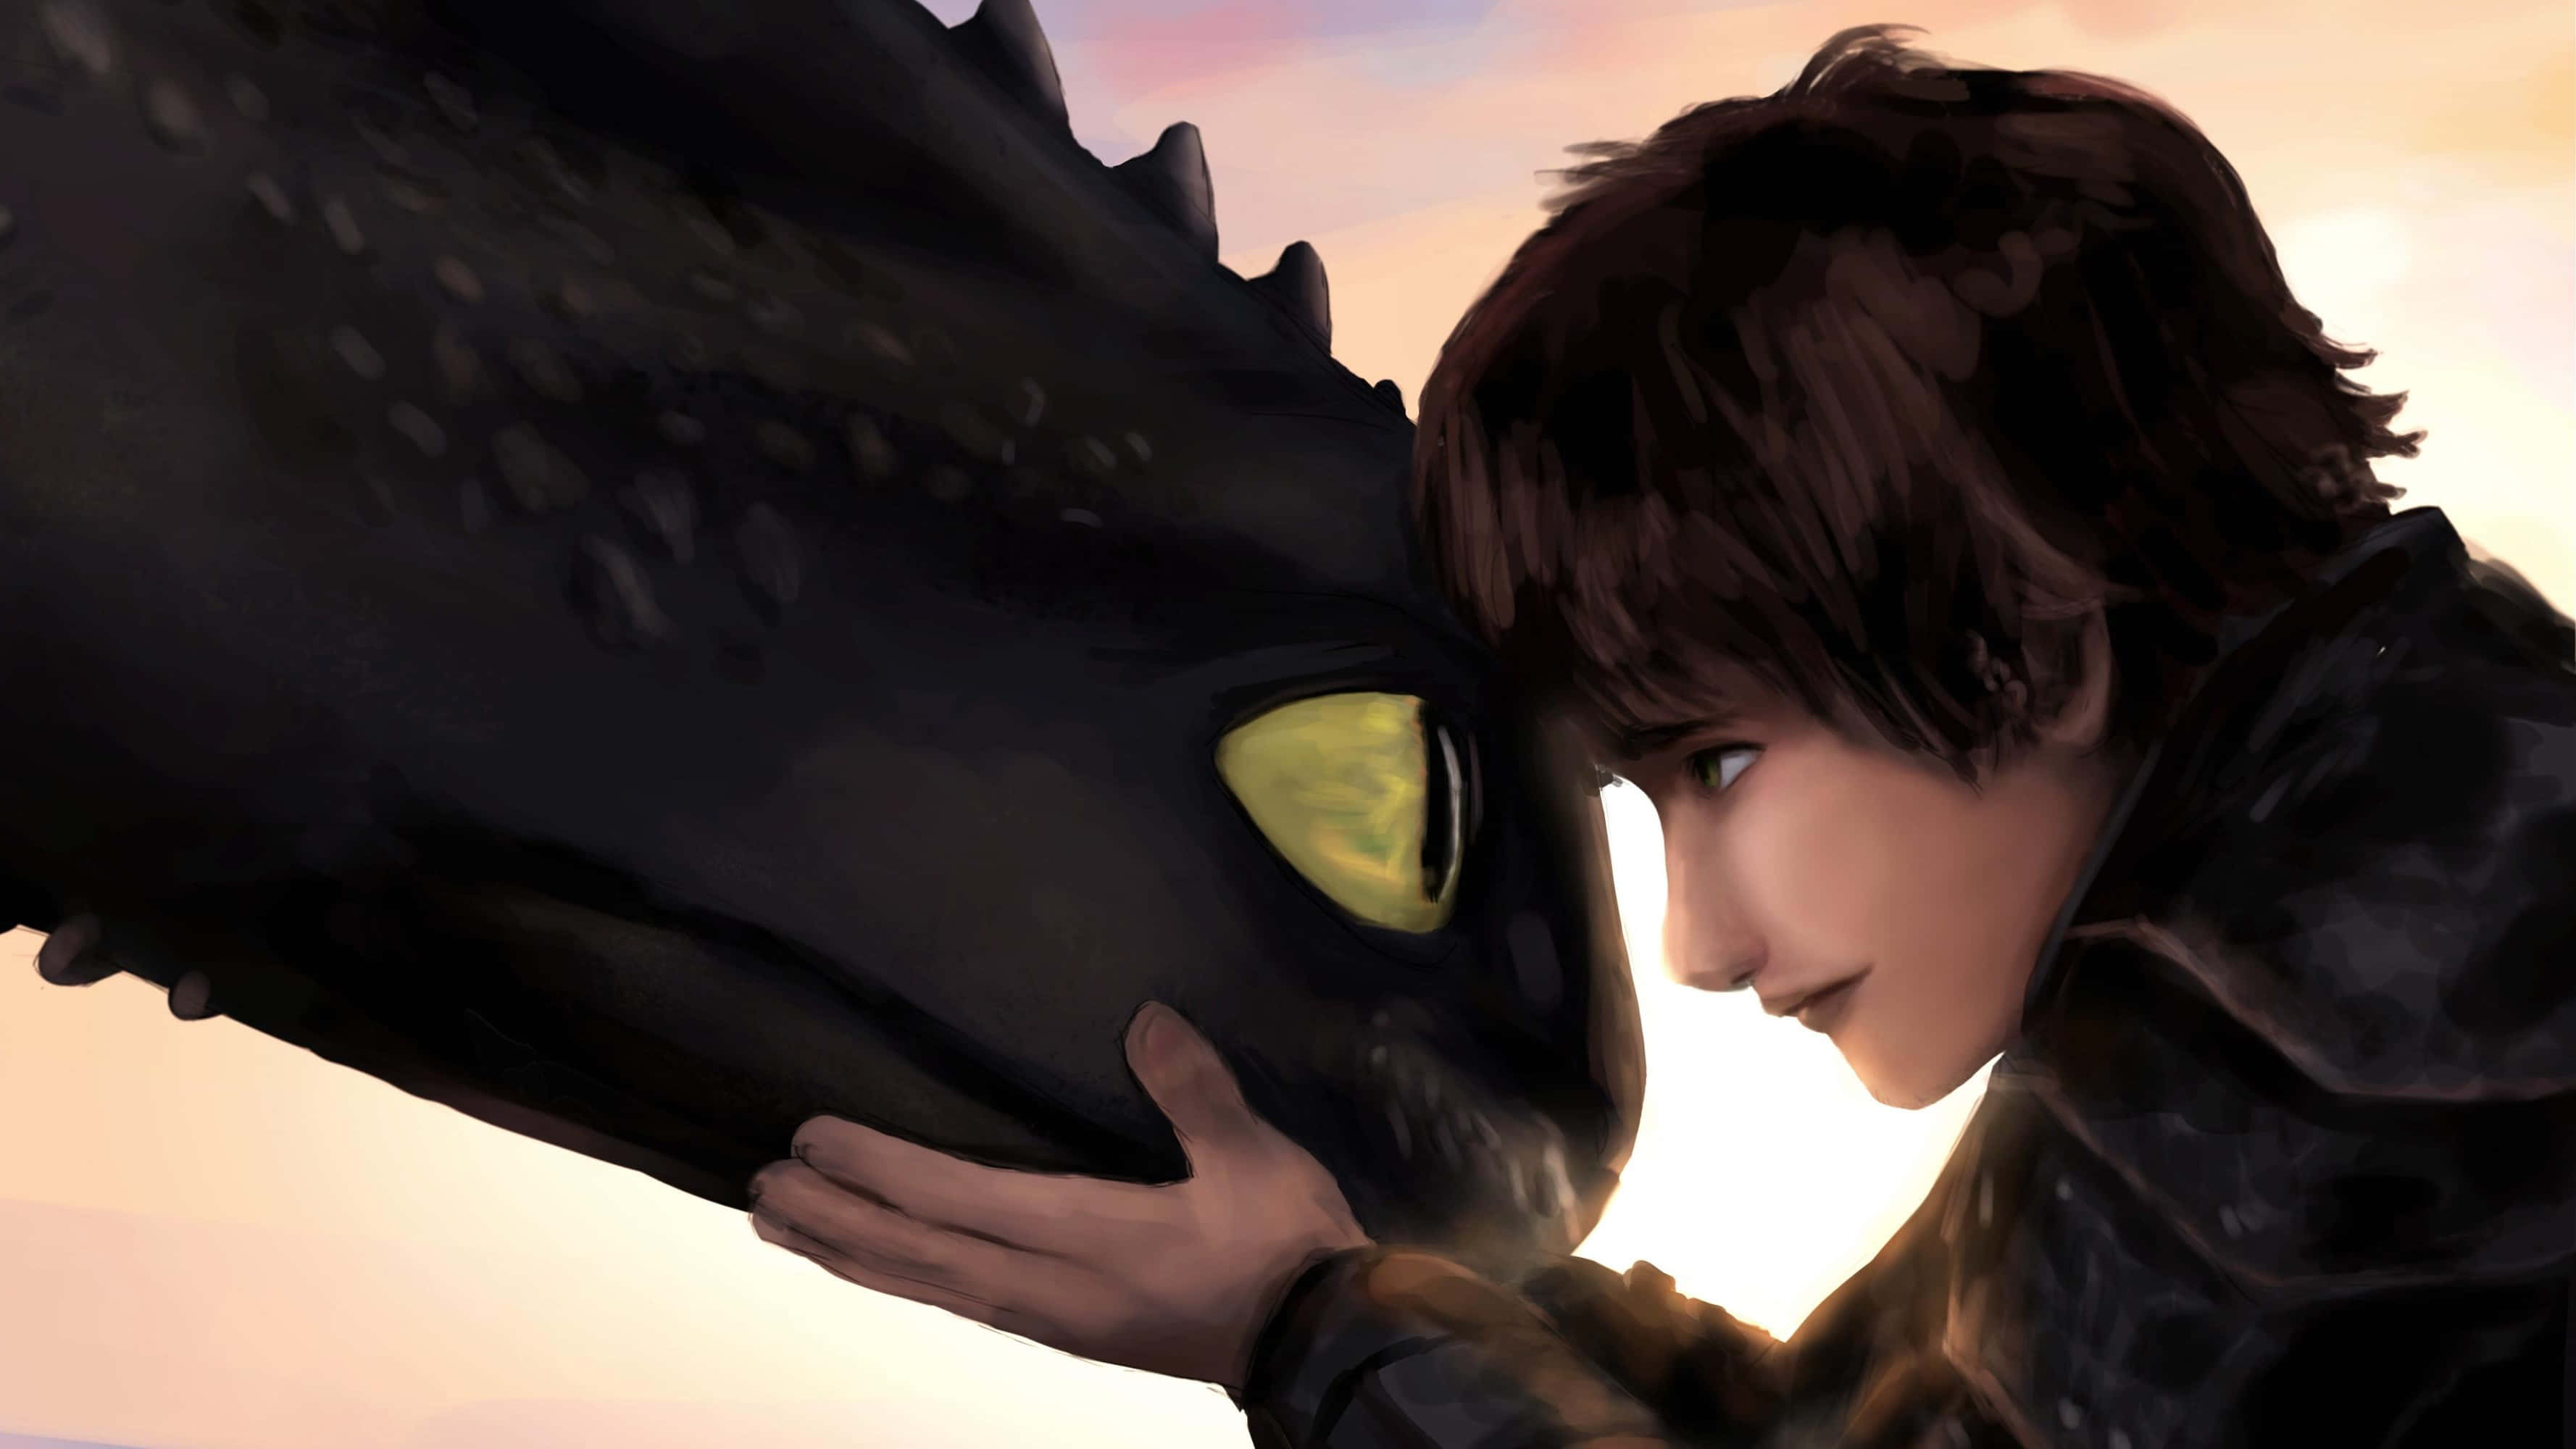 Fly into the adventure of How to Train Your Dragon with Hiccup and Toothless! Wallpaper